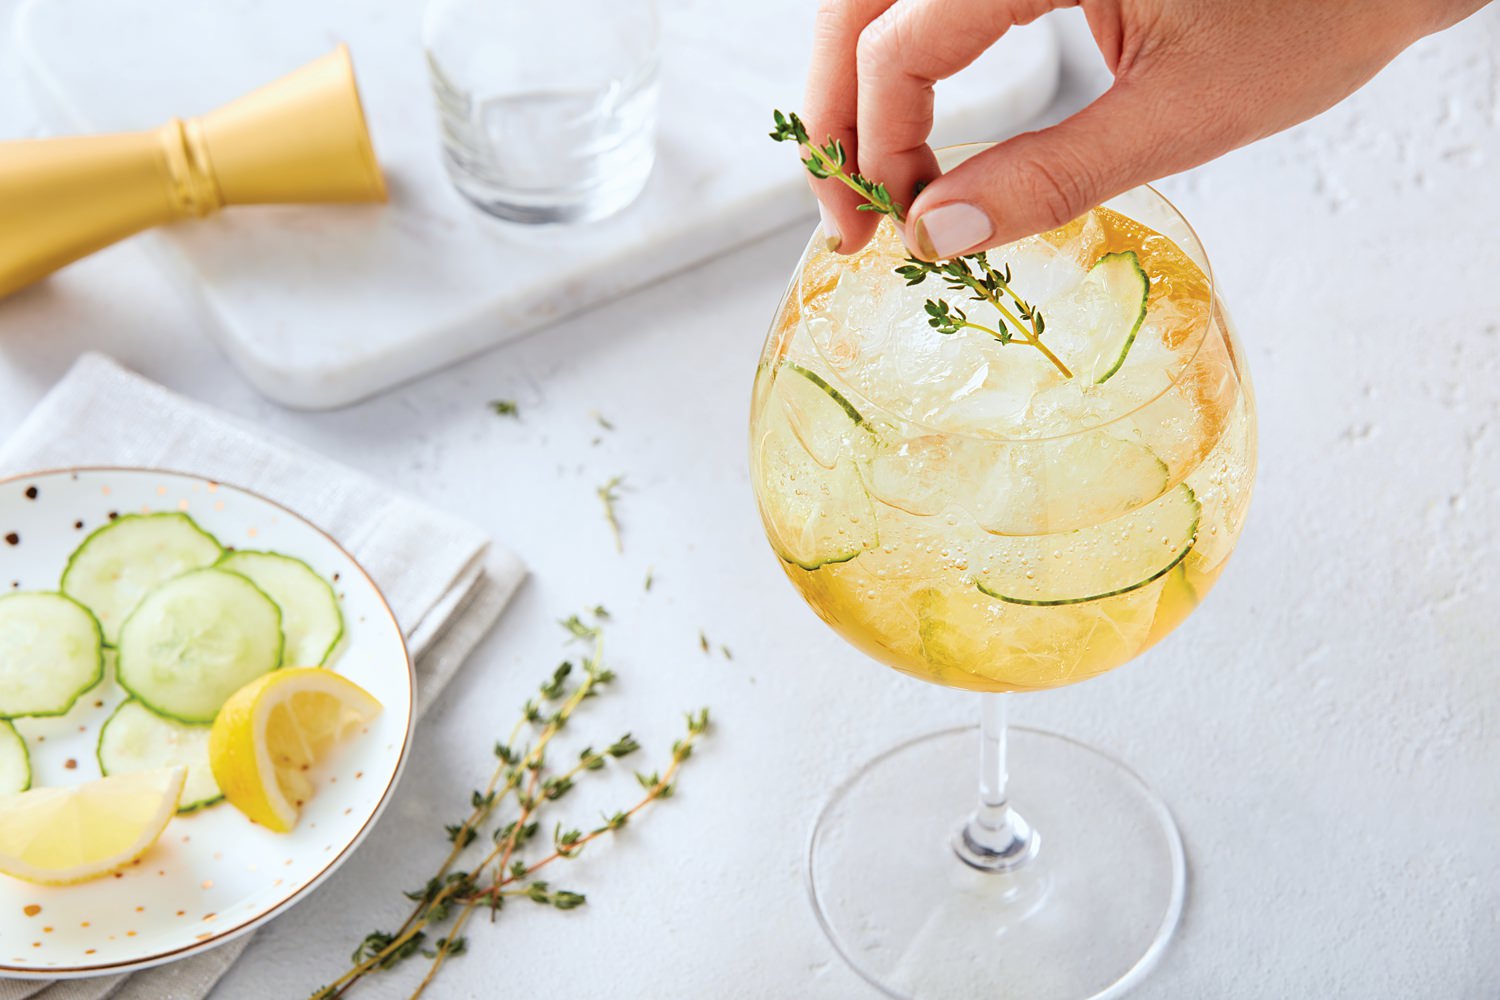 Royal Wedding viewing party cocktail ideas! The Windsor Knot